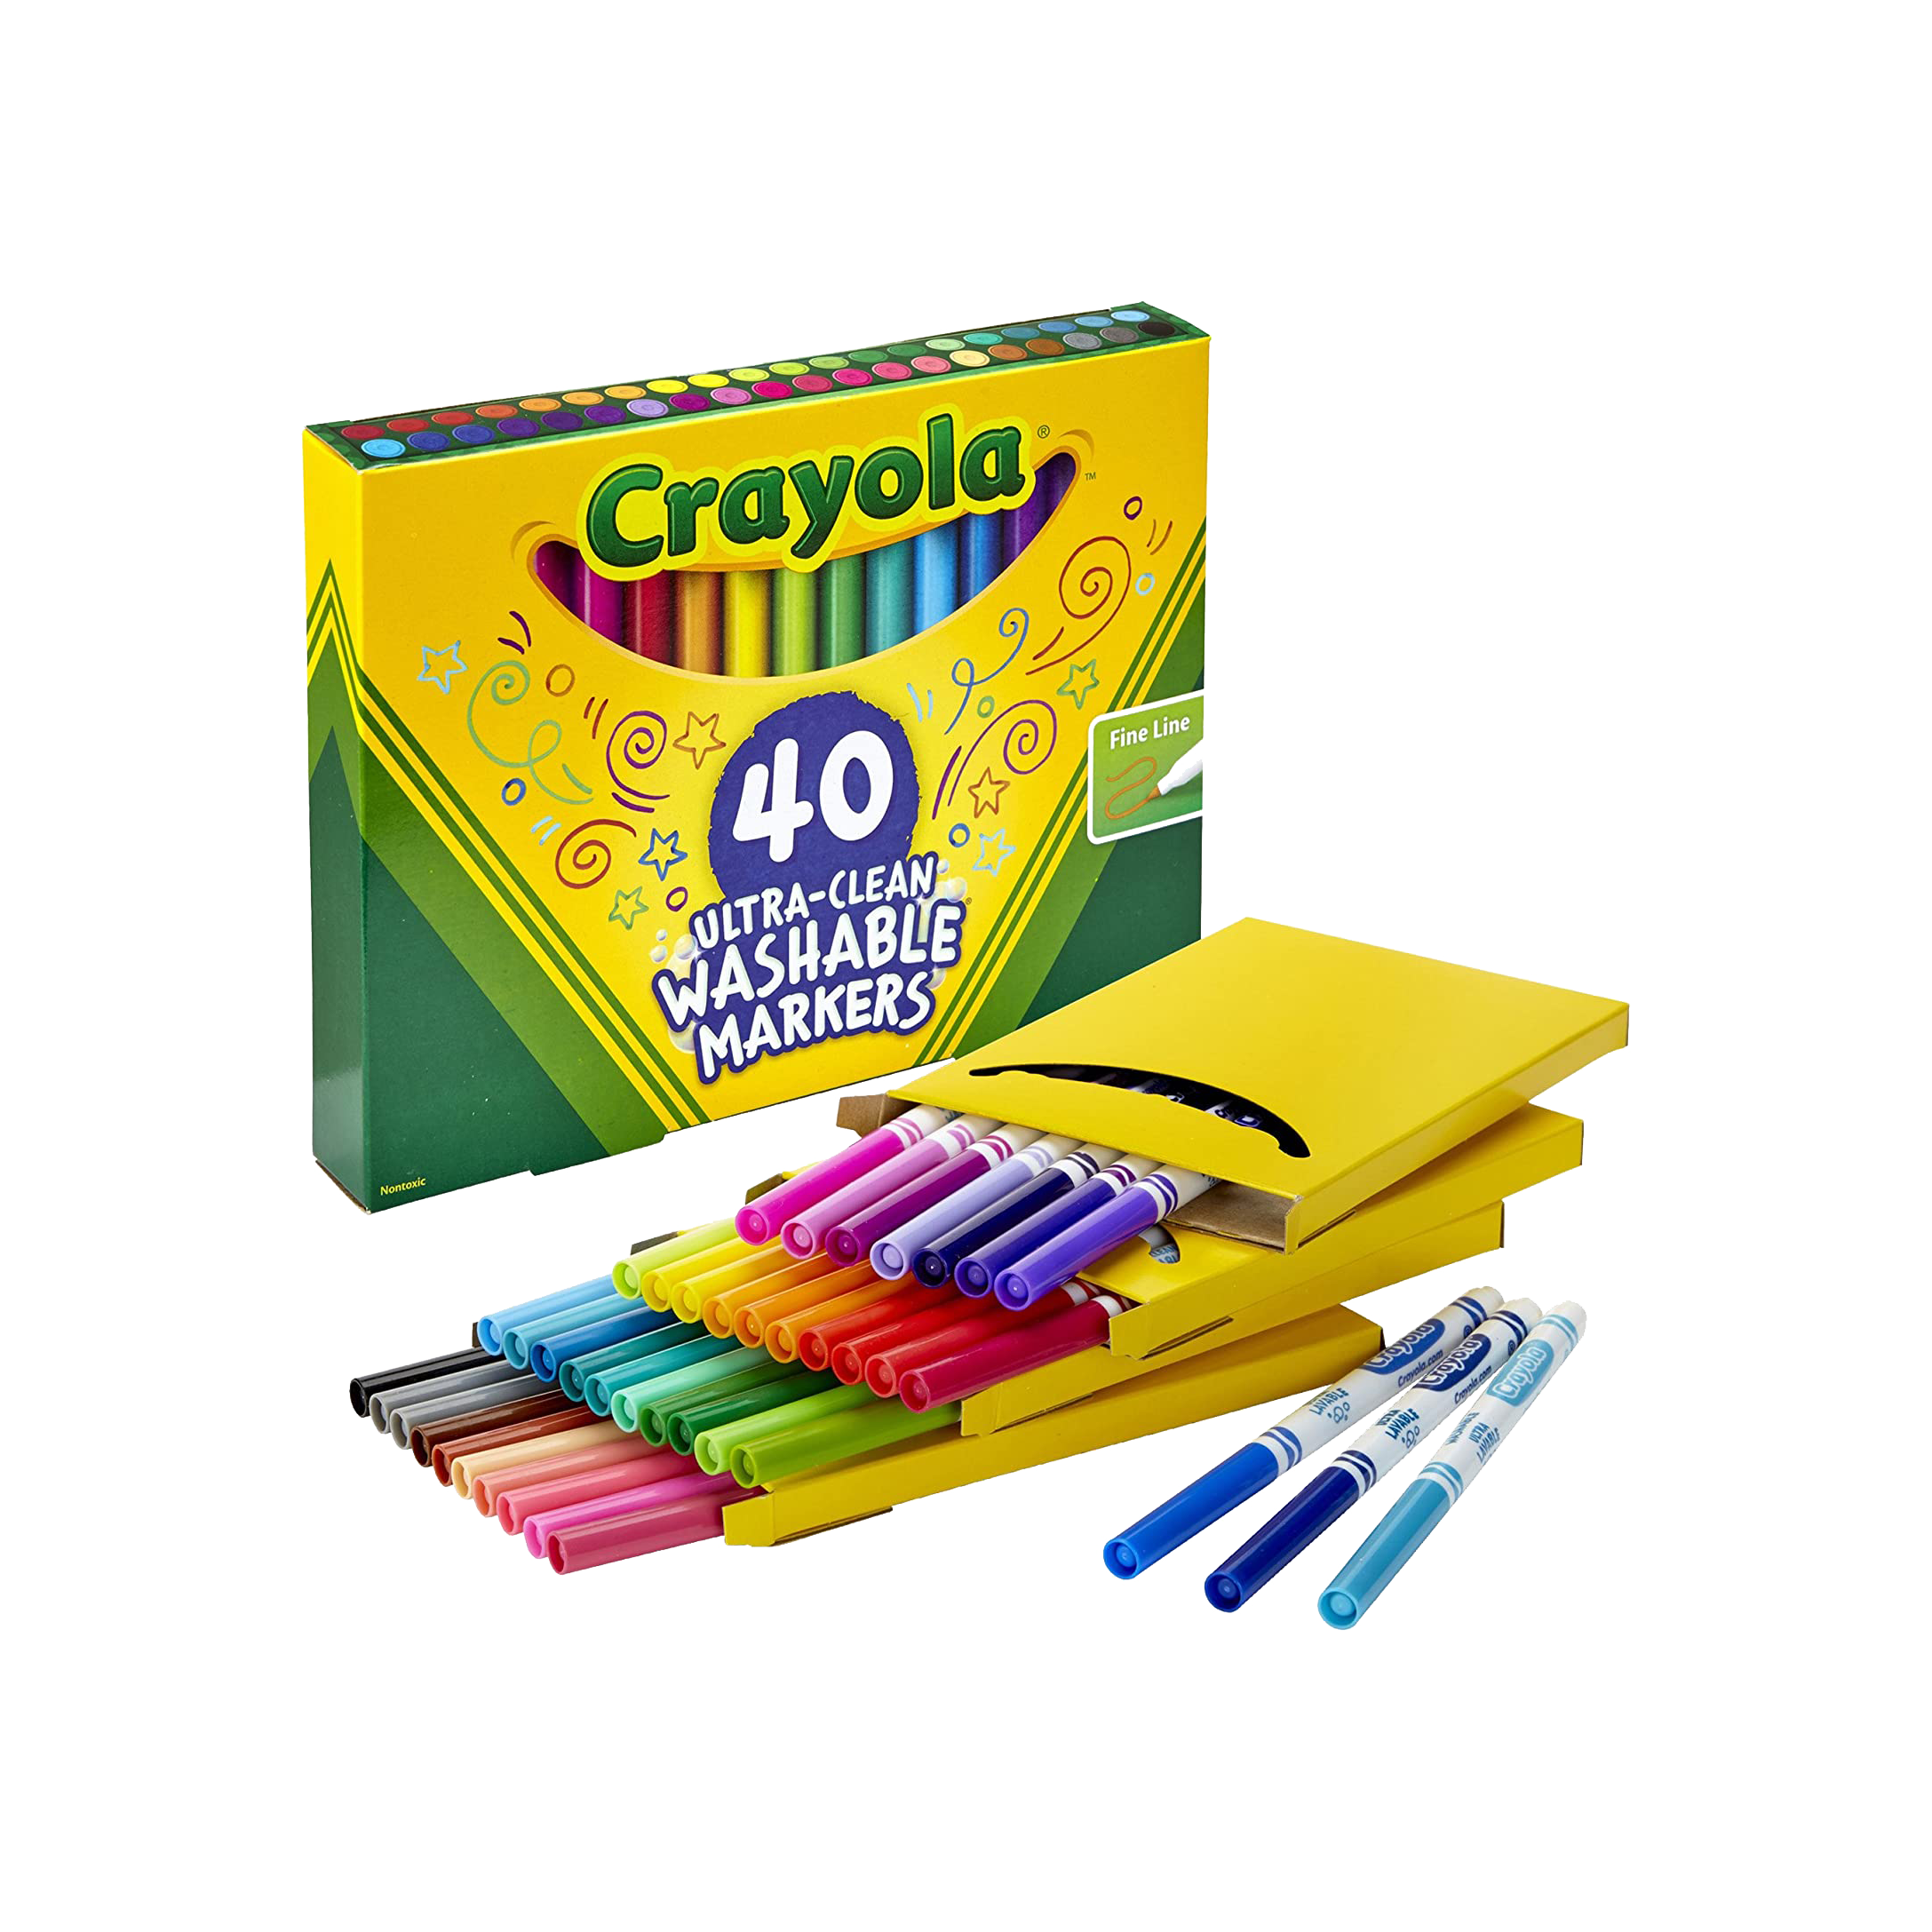 Ultra Clean Washable Crayons: What's Inside the Box